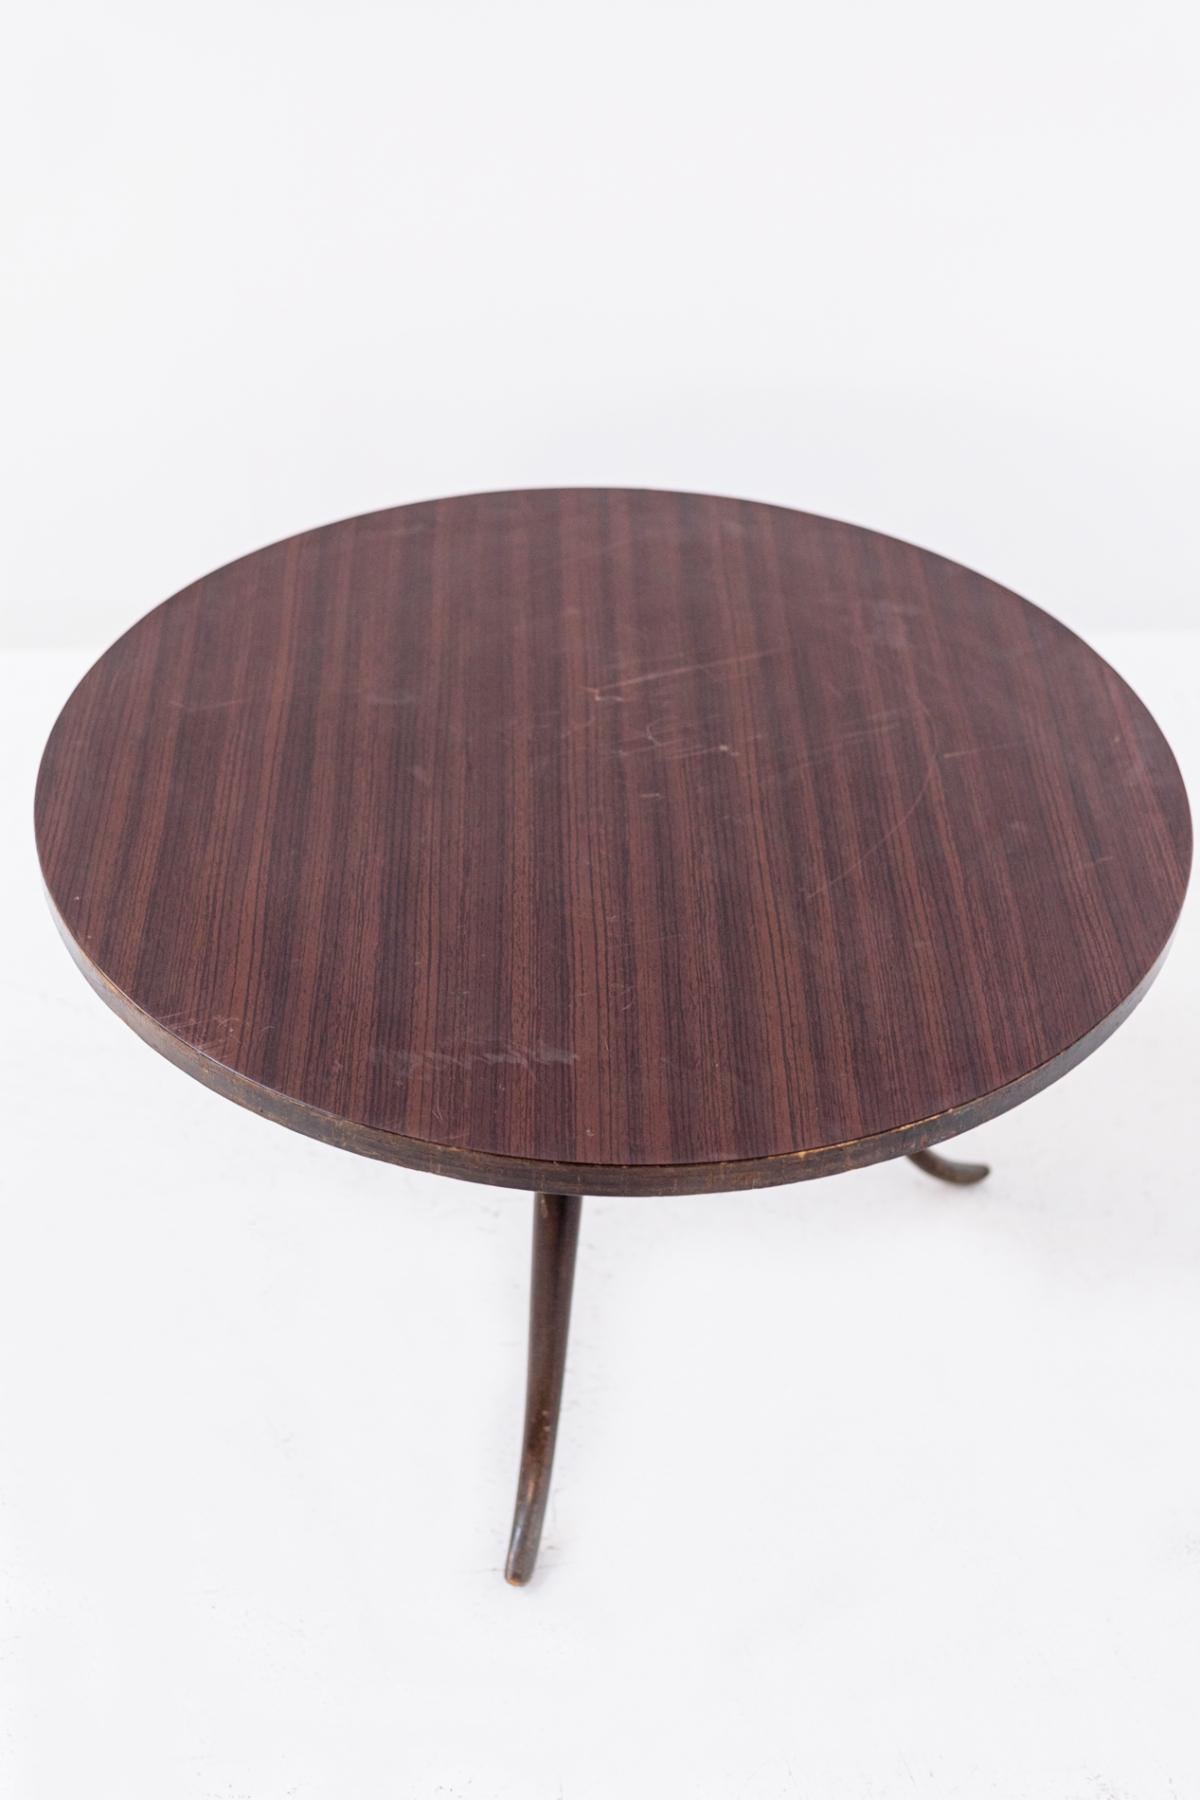 Beautiful coffee table attributed to Guglielmo Ulrich from 1950.
The coffee table was entirely made of fine wood, it features a circular top. Its peculiarity lies in the legs, which have a slight outward curvature at the bottom, which gives the